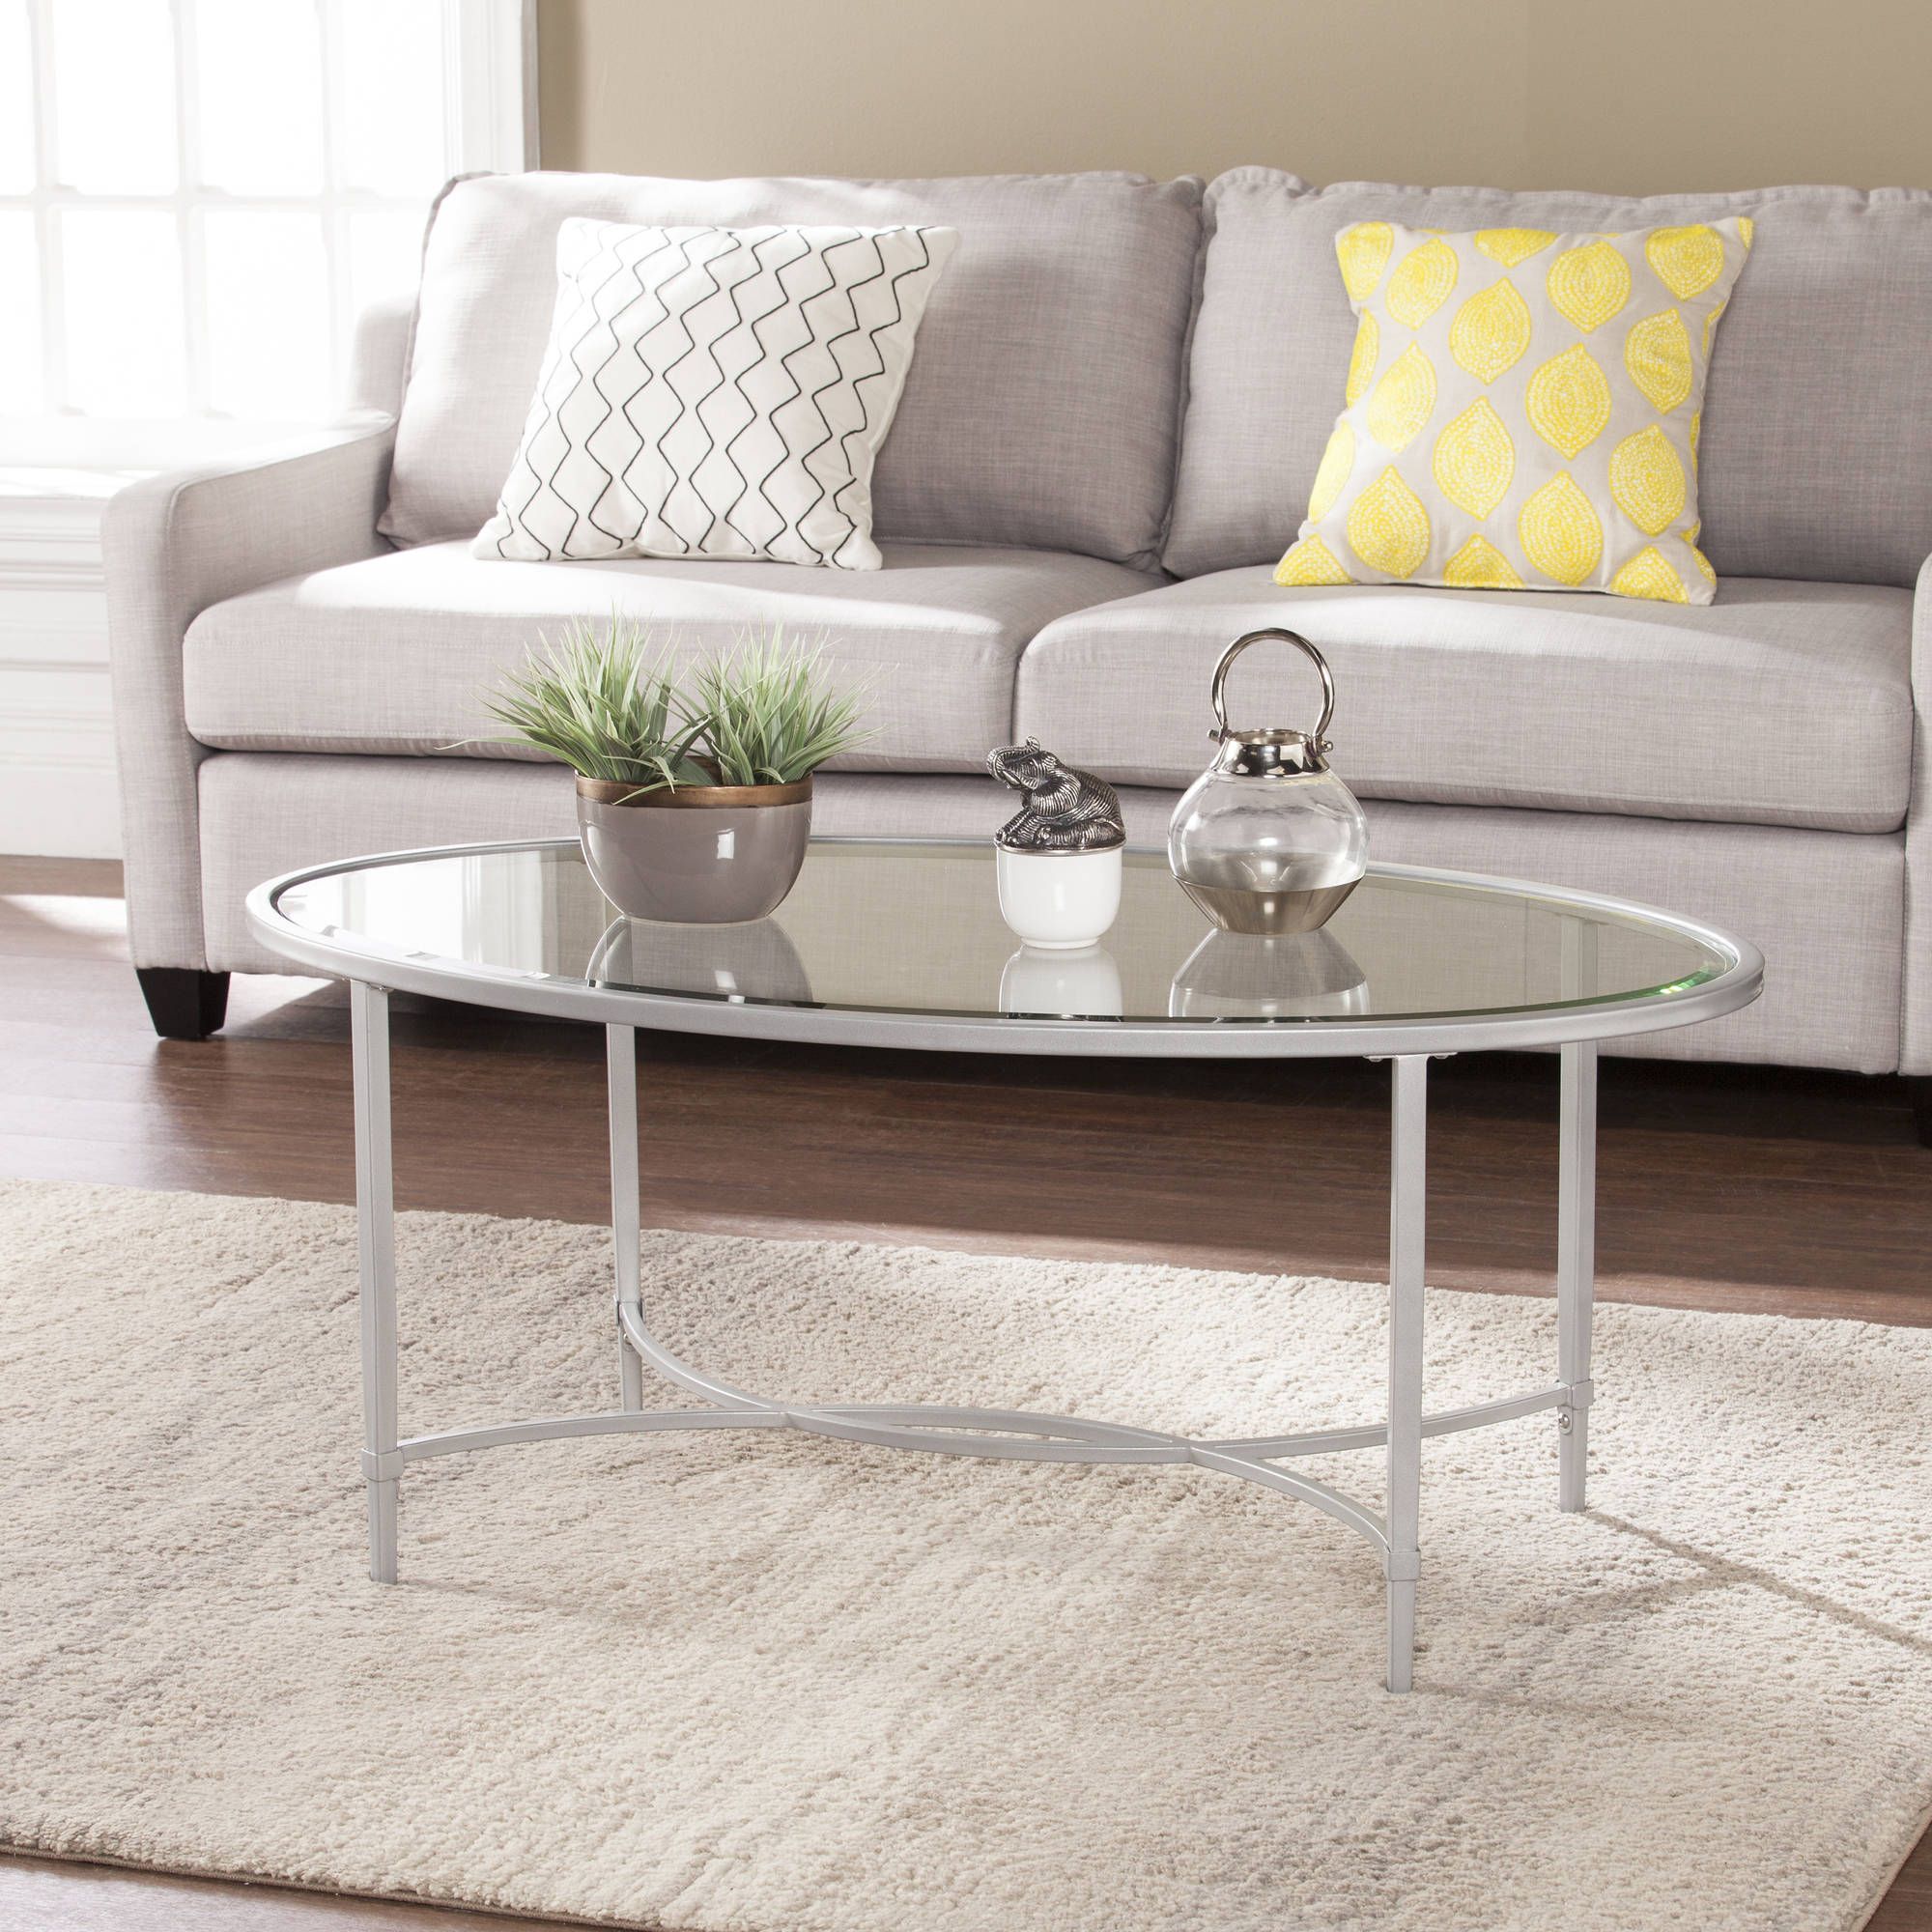 Quibilah Metal/glass Oval Coffee Table, Silver – Walmart With Metallic Silver Cocktail Tables (View 8 of 15)